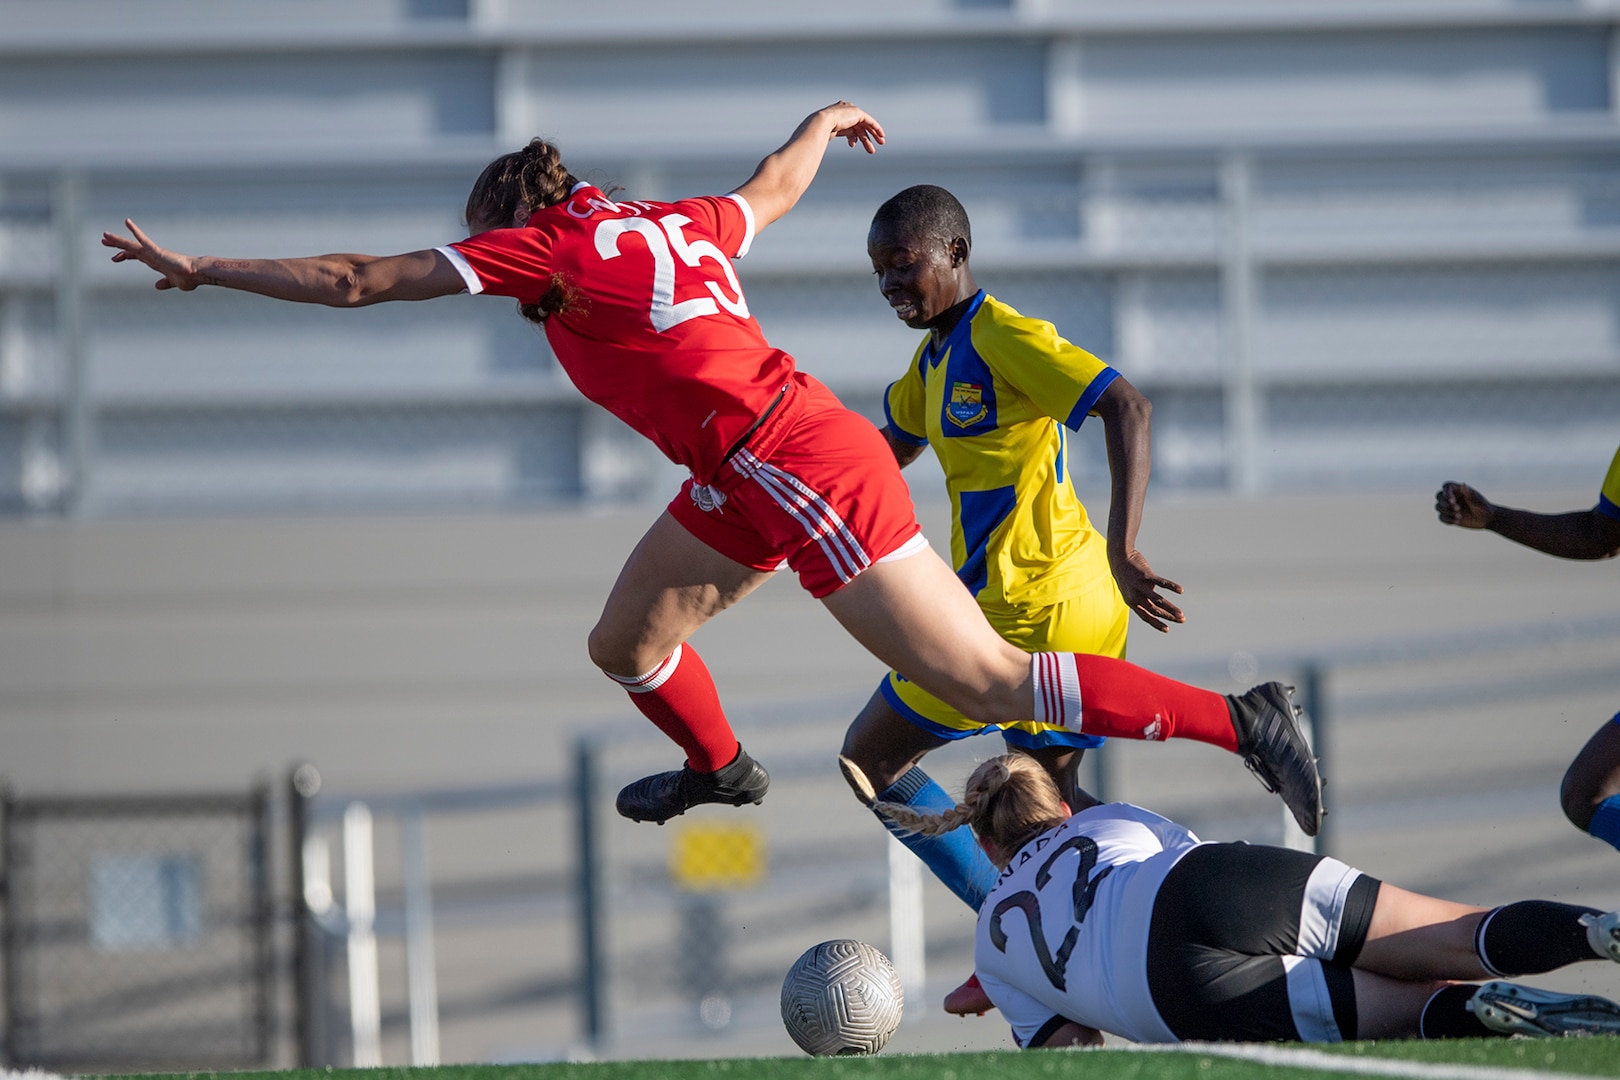 Mali’s Oumou Kone scores her first goal of the game against Team Canada defenders during the 13th CISM (International Military Sports Council) World Military Women’s Football Championship in Meade, Washington July 20, 2022. (DoD photo by EJ Hersom)